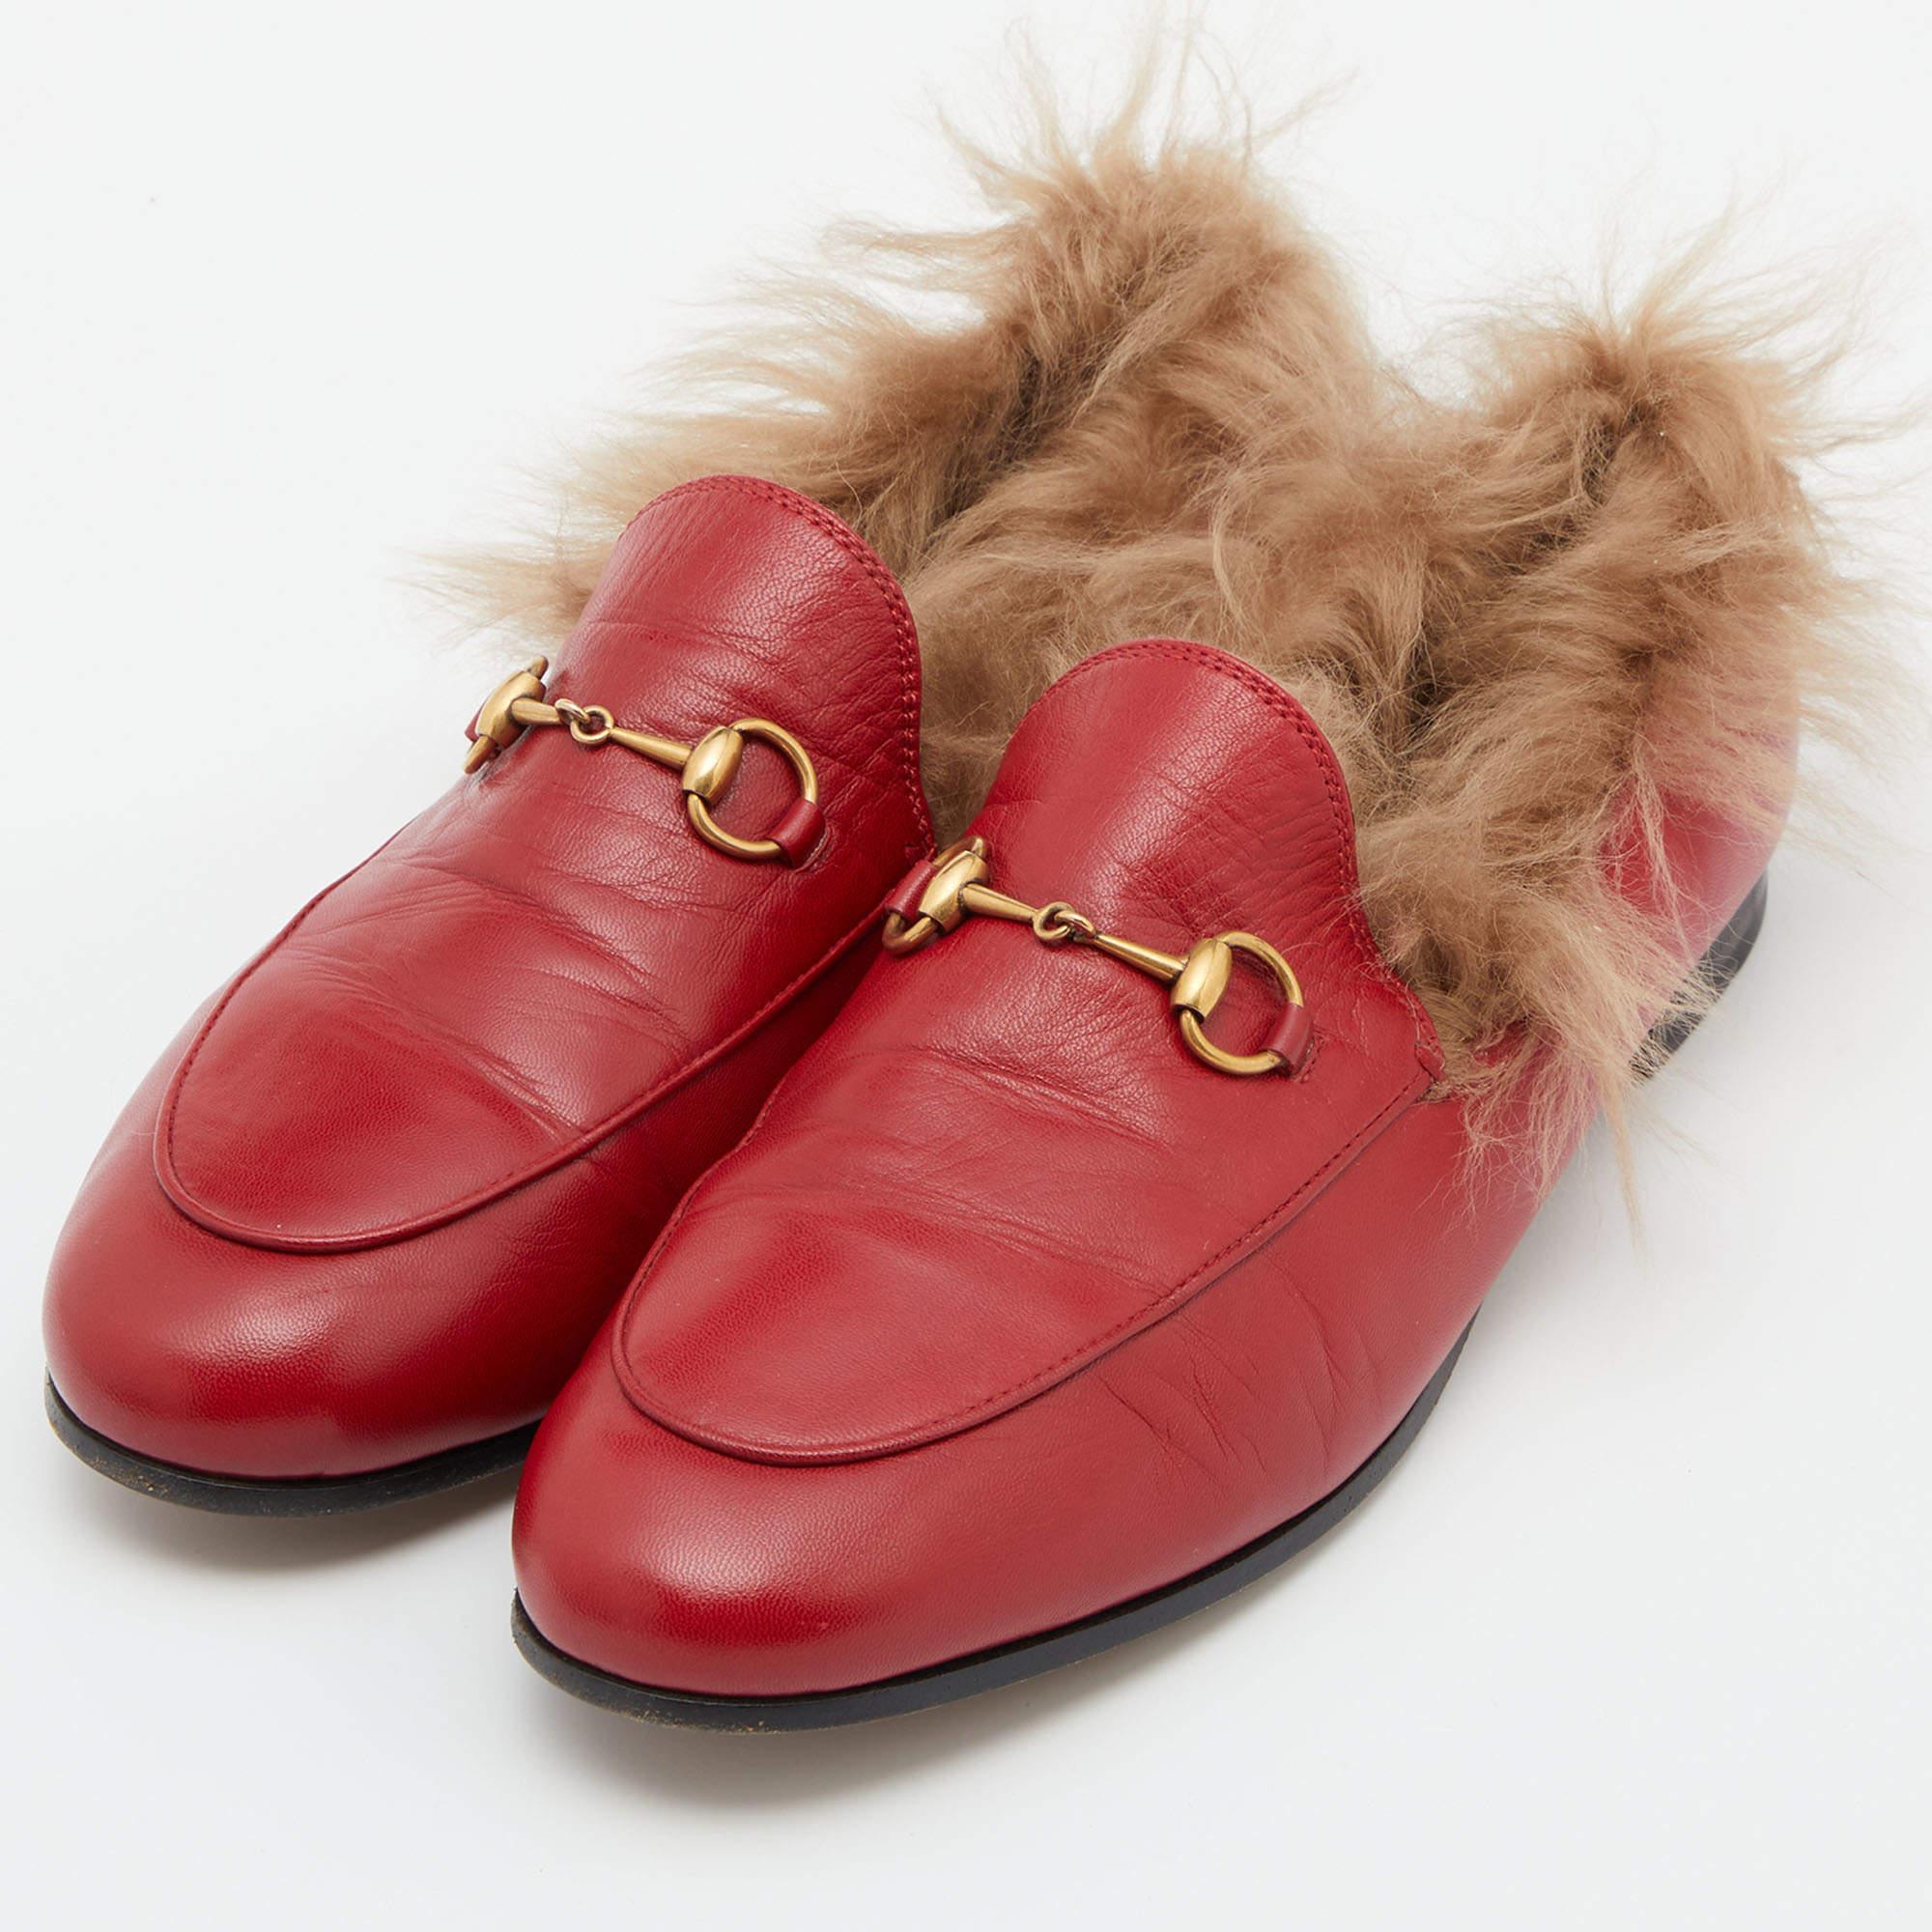 These Gucci Princetown mules signify luxury and practicality. An ultimate favourite of style enthusiasts, its silhouette gets a luxe update with the Horsebit motif on the uppers, and its charm is enhanced with gold-tone accents. It comes made from